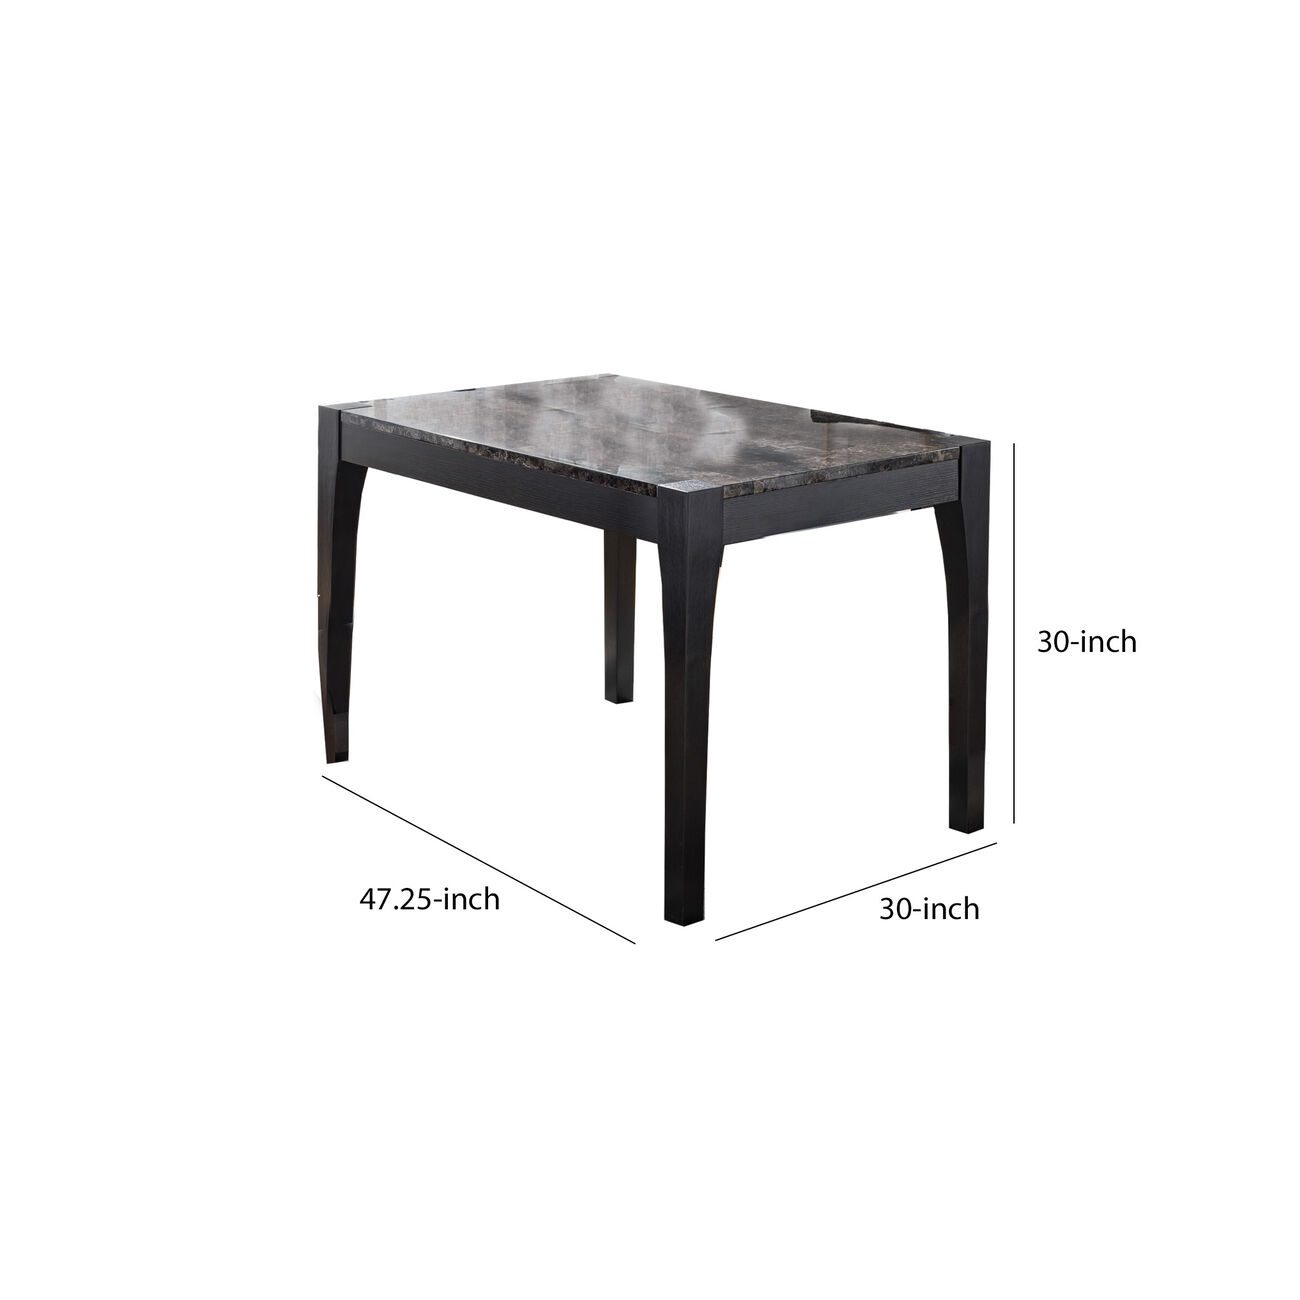 Faux Marble Top Wooden Dining Table with Straight Legs, Dark Brown